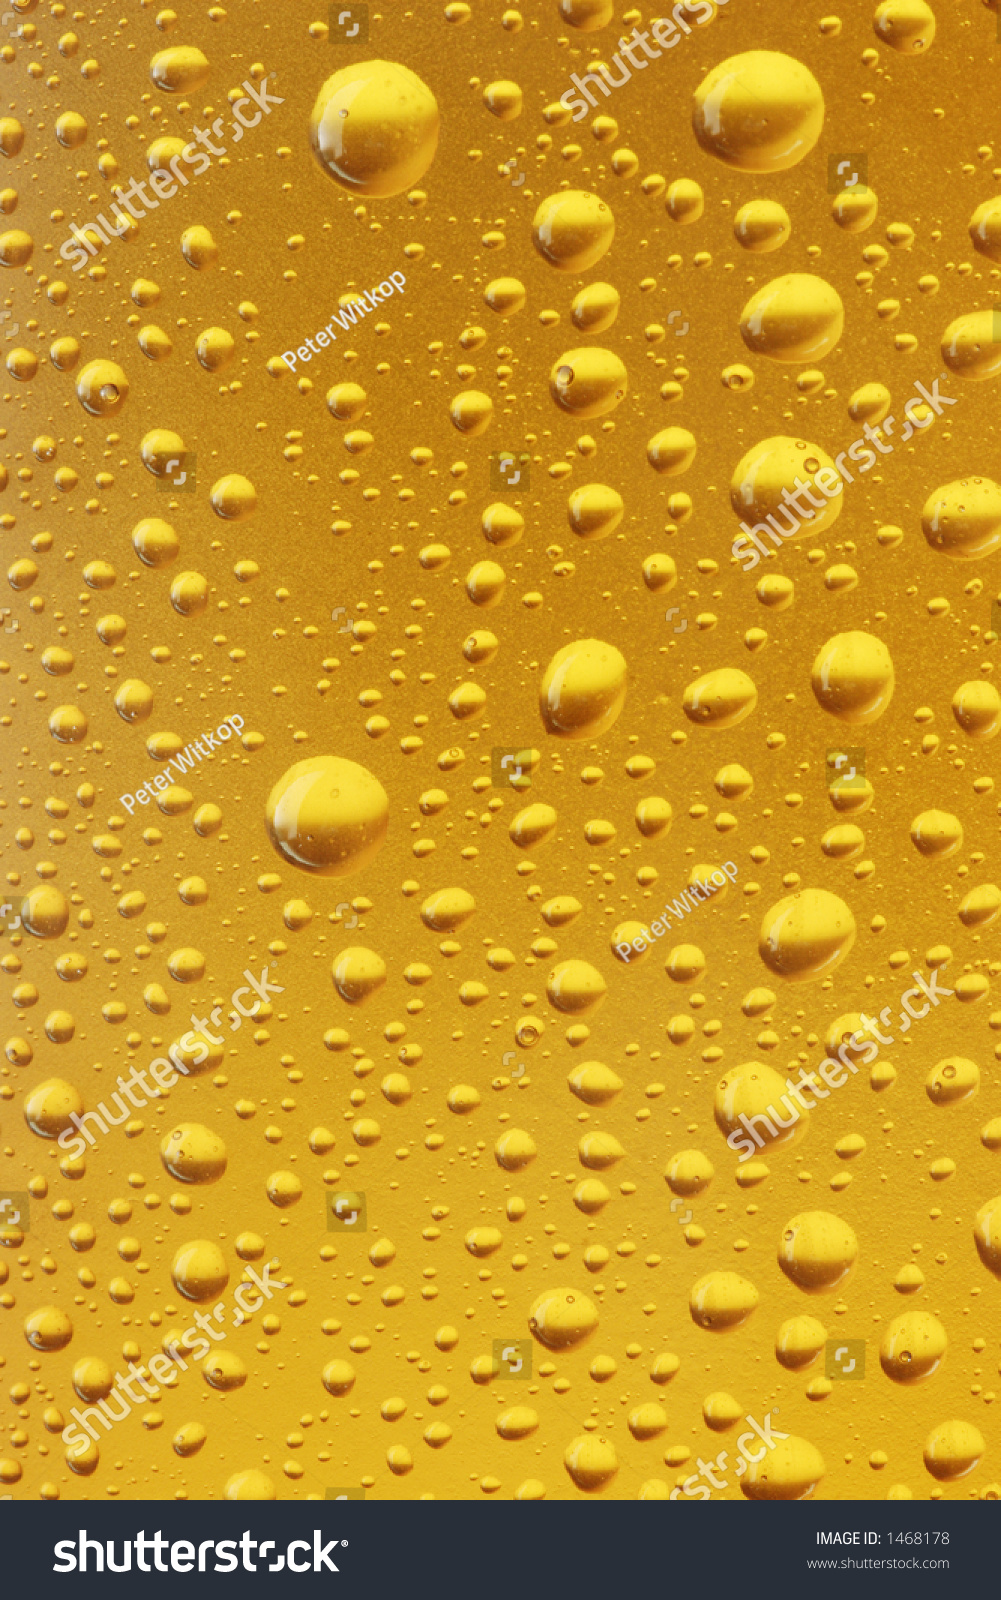 Download Condensation On Amber Beer Bottle Stock Photo Edit Now 1468178 Yellowimages Mockups